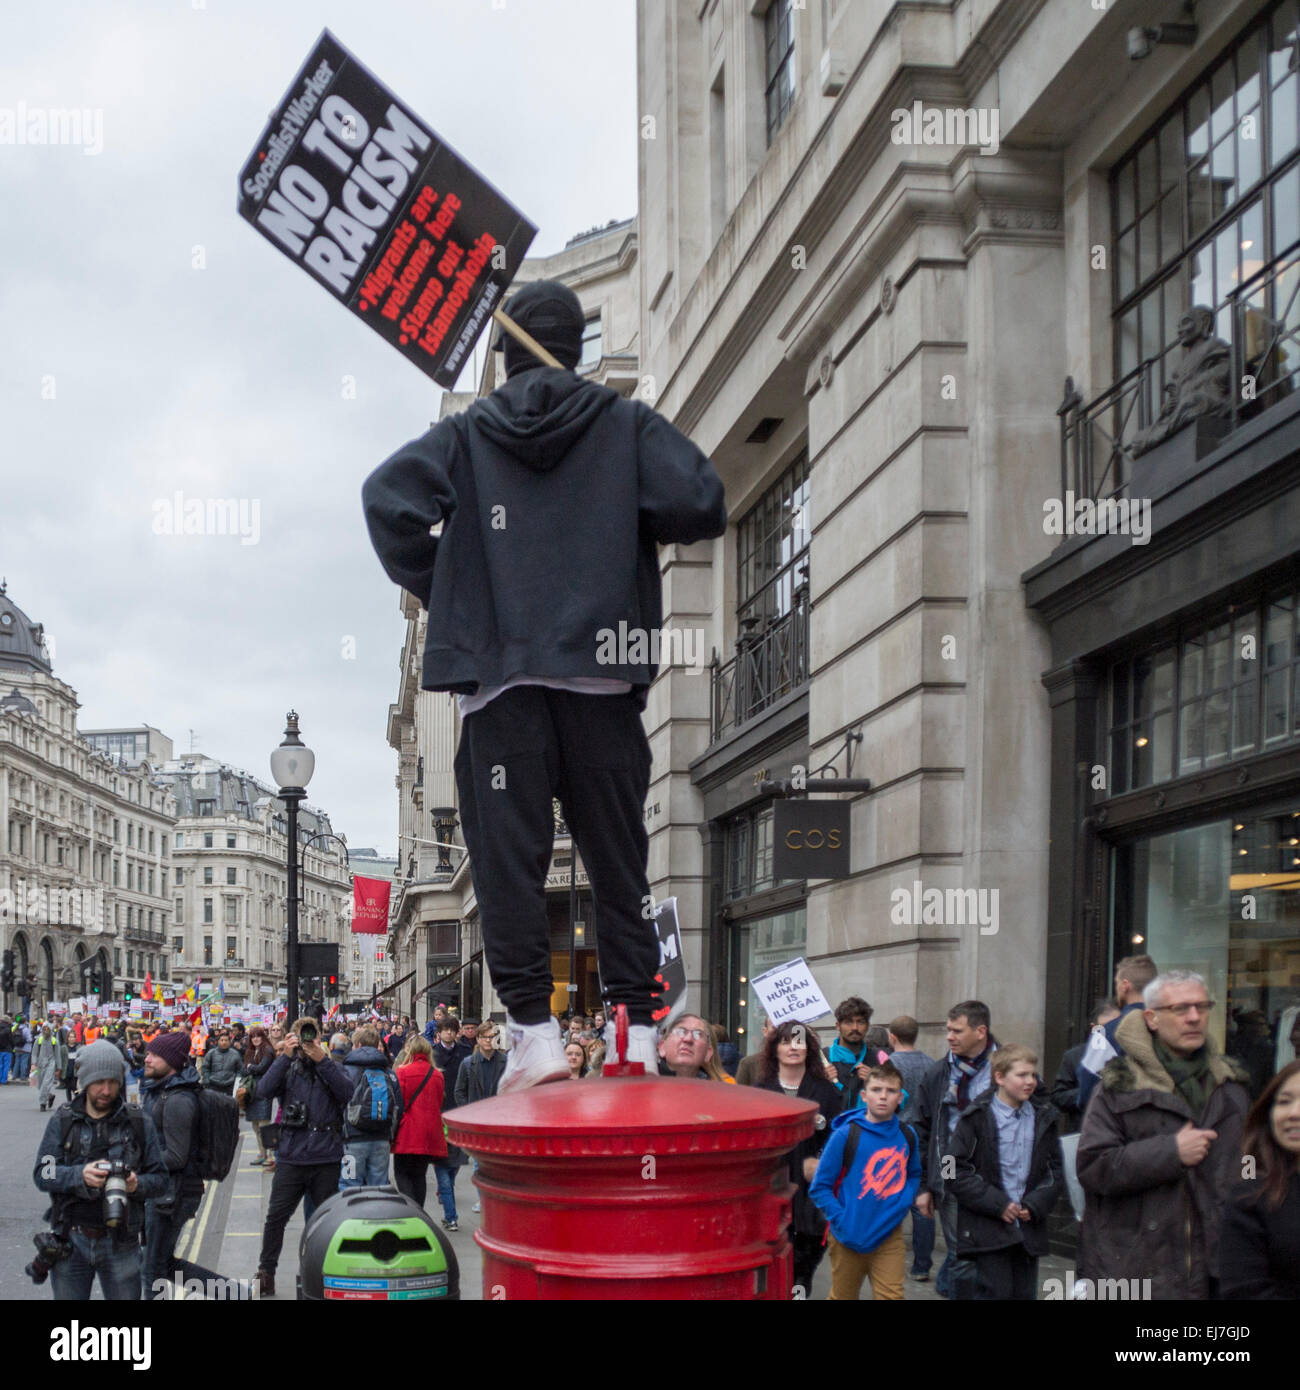 London UK, 21st March 2015: Protesters at the Stand Up To Racism & Fascism demonstration. Stock Photo